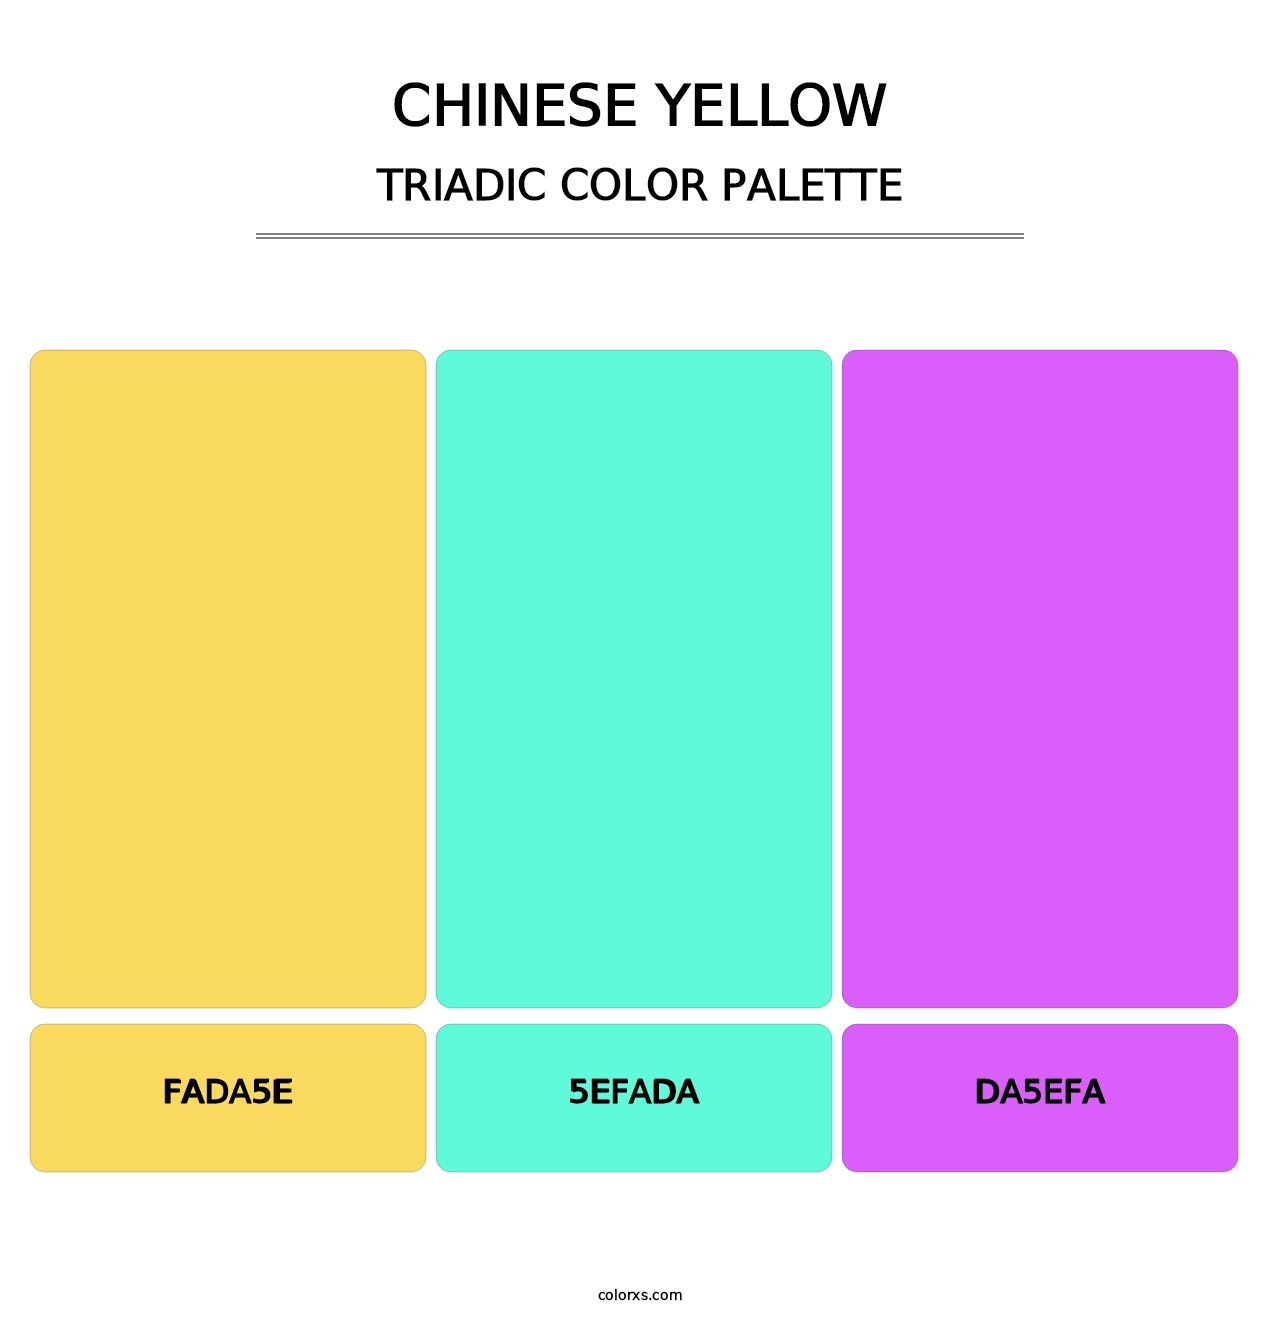 Chinese Yellow - Triadic Color Palette